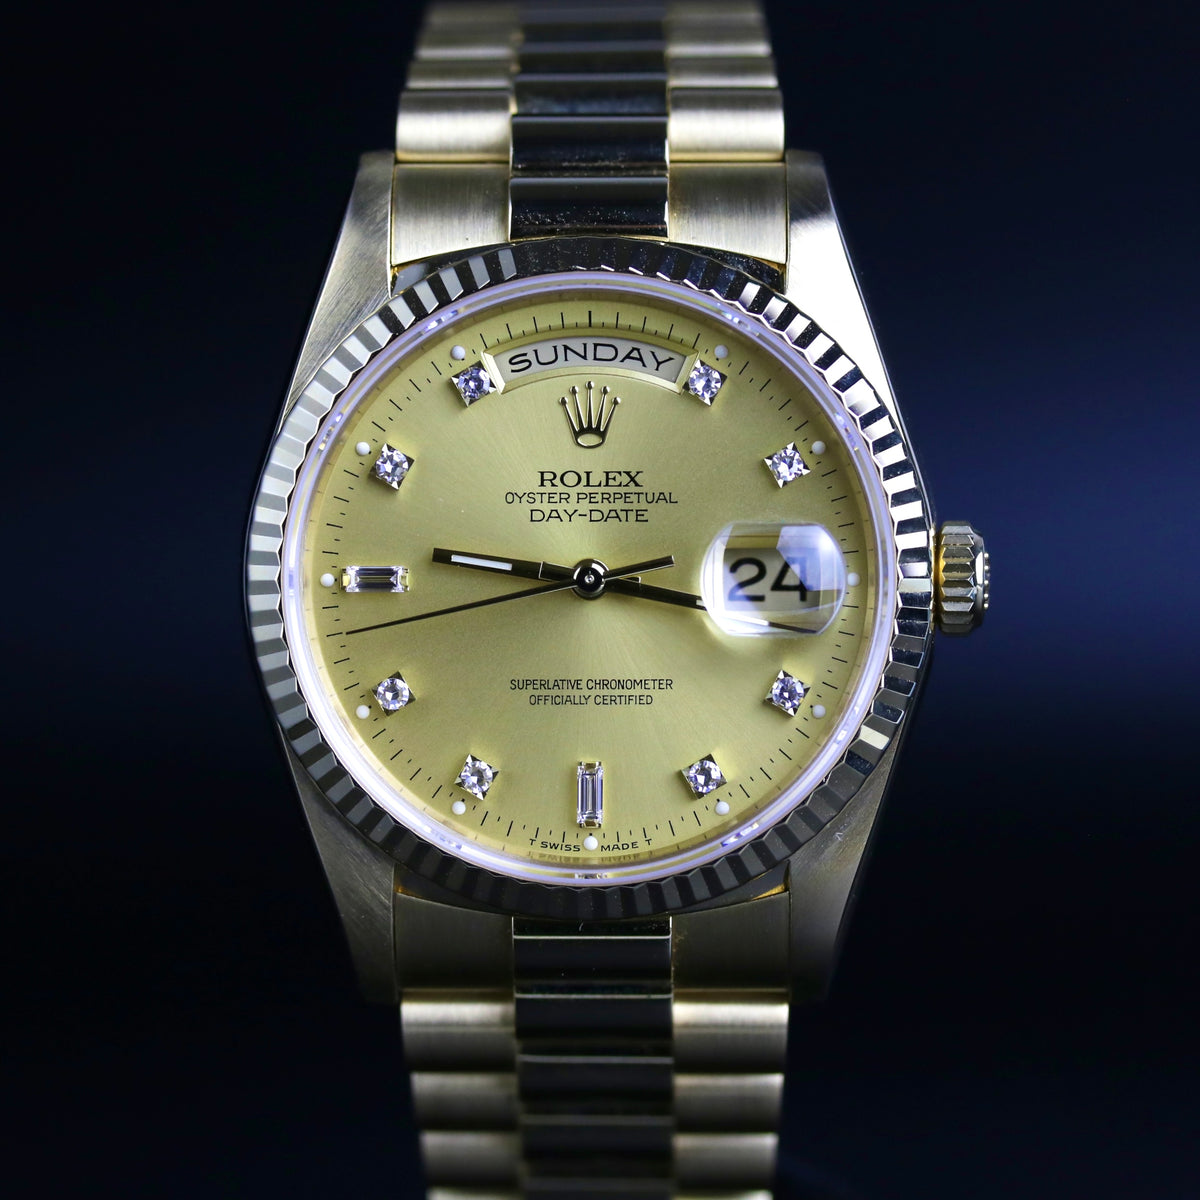 1994 Rolex 18238 Daydate 36mm Factory Diamond Dial with Rolex Service Card